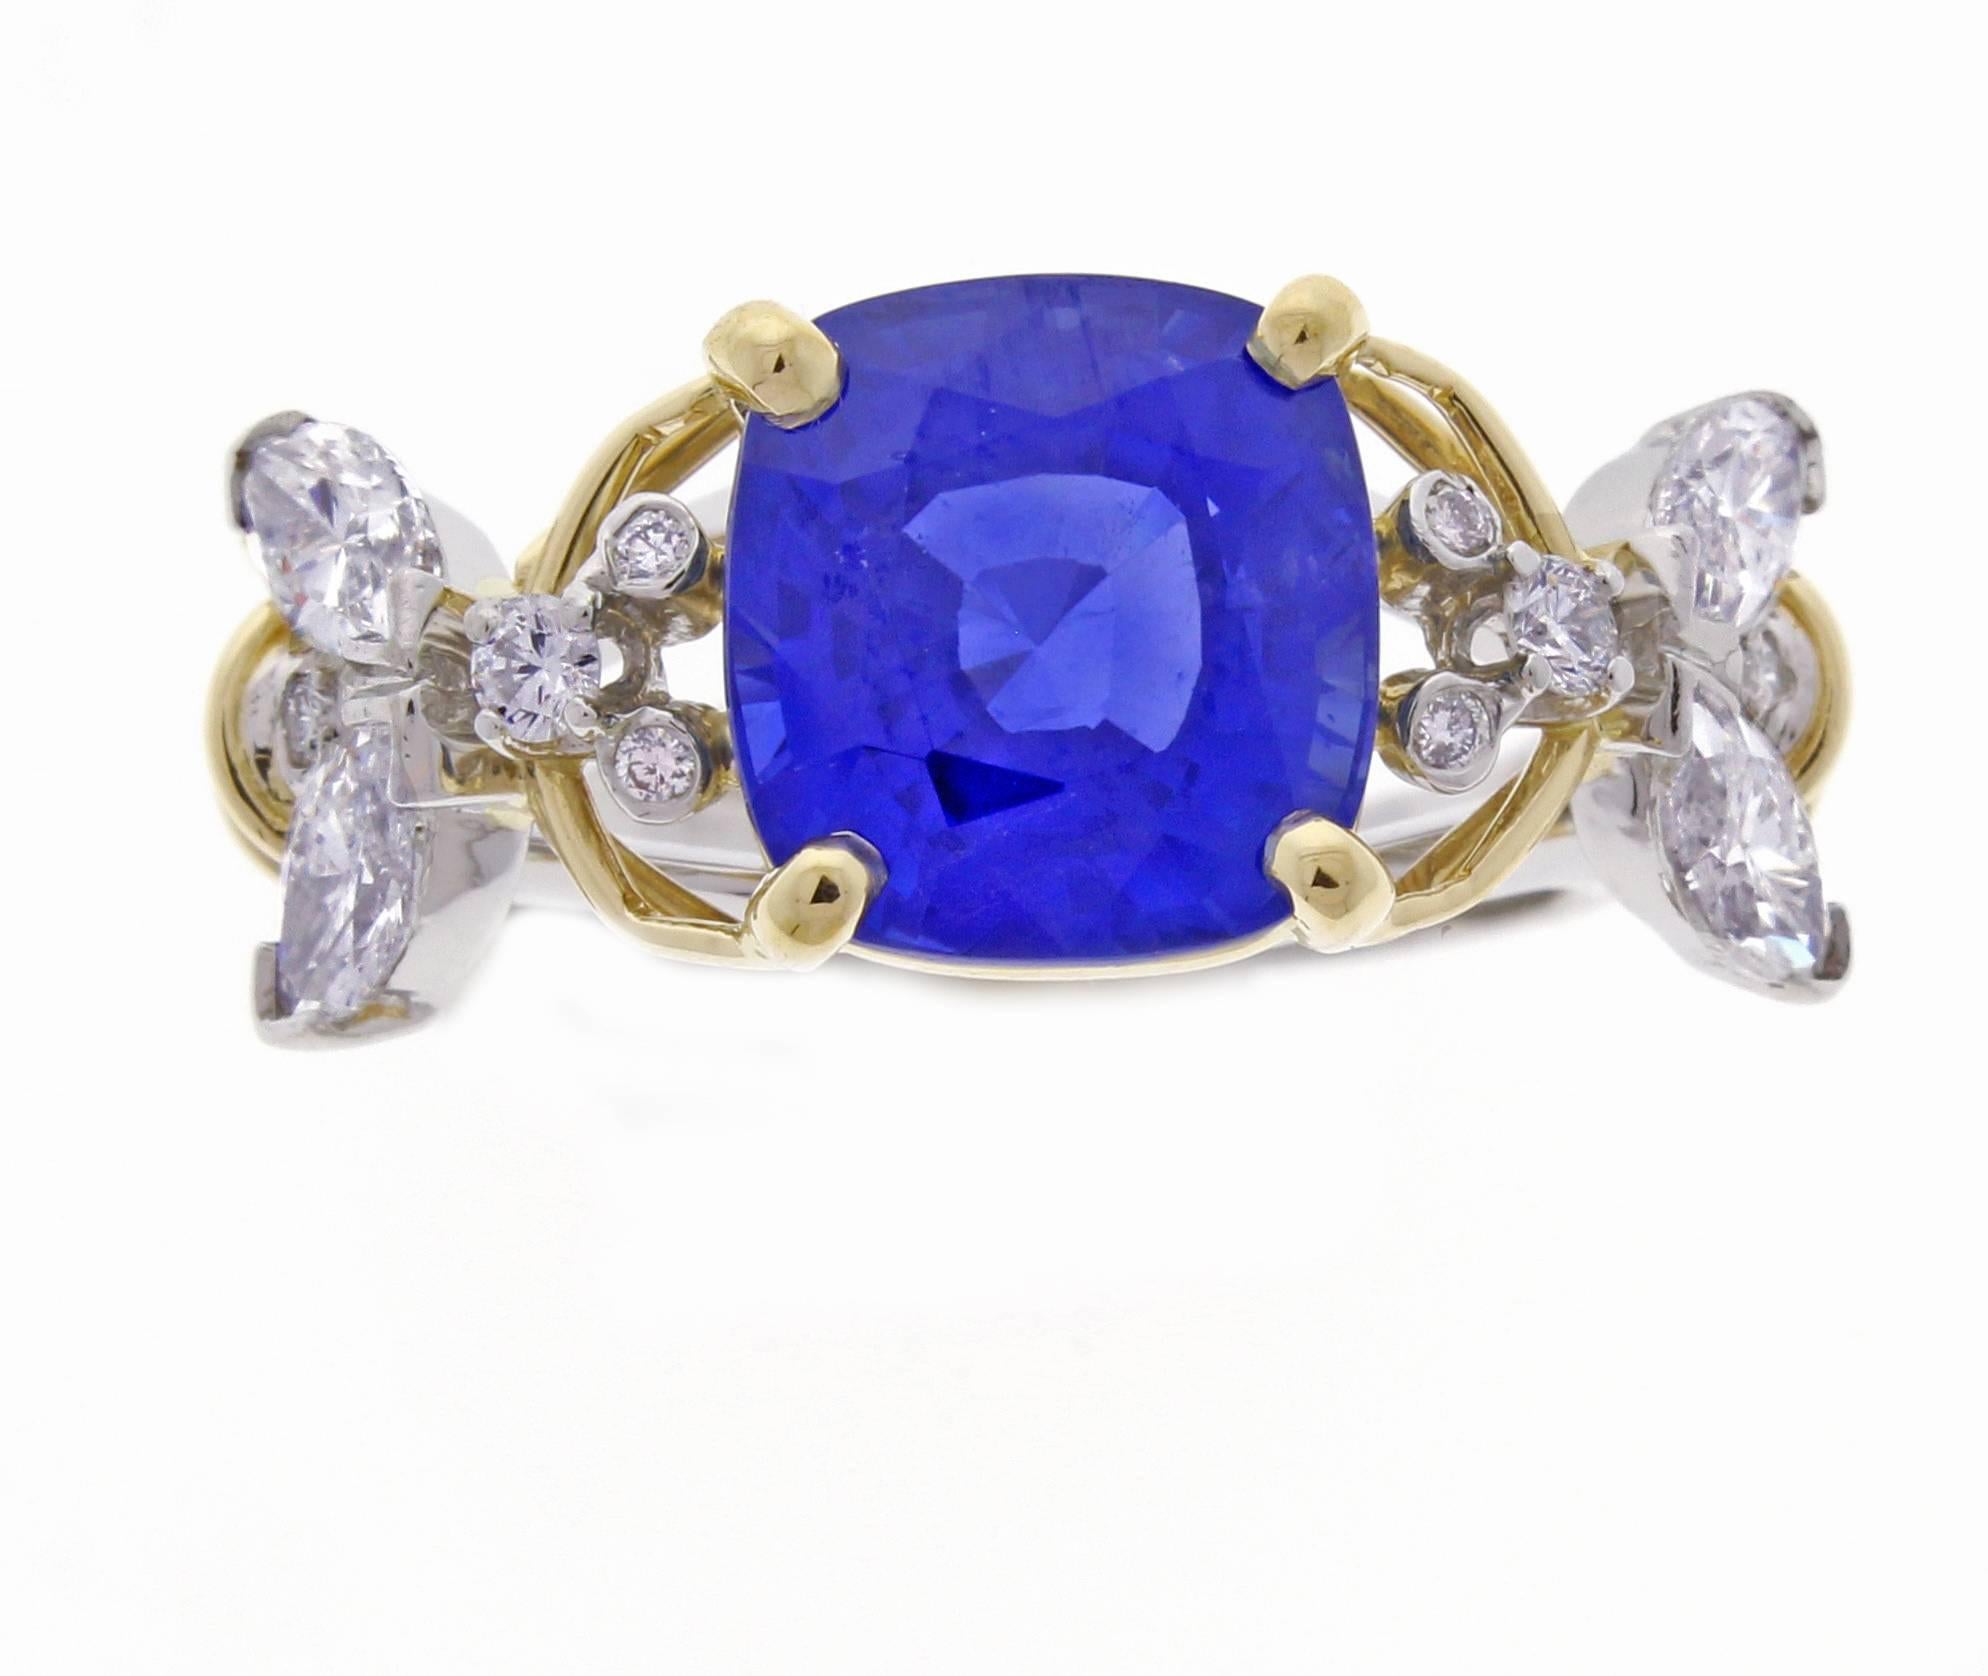 A magnificent gem 5.37 carat unheated Burma sapphire framed by diamonds fashioned to resemble bees, a traditional symbol of royalty. Set in platinum with 18k gold accents signed Tiffany & Co. Schlumberger. 10 Diamond weight.  AGL report accompanies